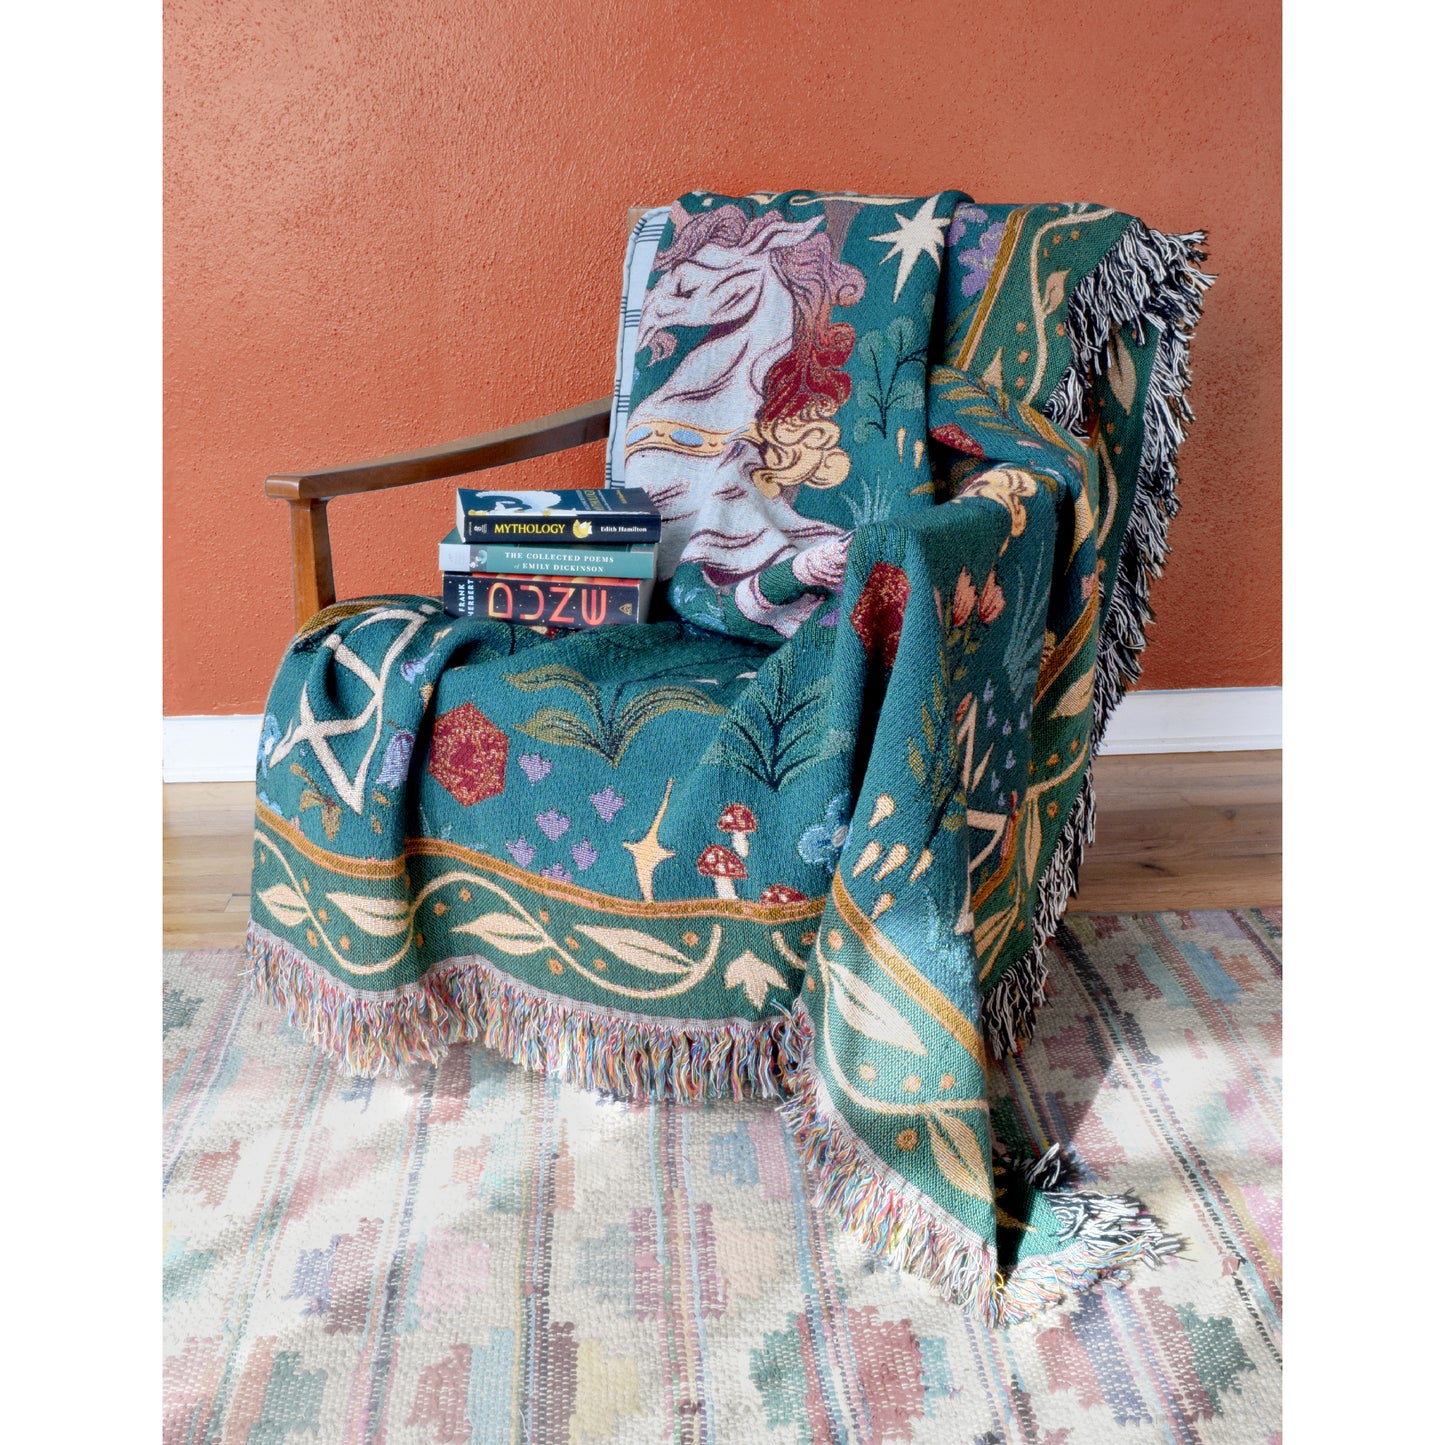 Photo of a teal and green tapestry blanket with Garyl in the center. He’s rearing back on his hind legs and has a flowing mane and tail. There are flowers around him. Above him is a tree with blue birds. There is a B.o.B. rune in each corner. The blanket is draped over a wooden chair with a stack of books on it. Sunlight streams into the room, highlighting a soft tan patterned rug and terracotta coloured wall. 